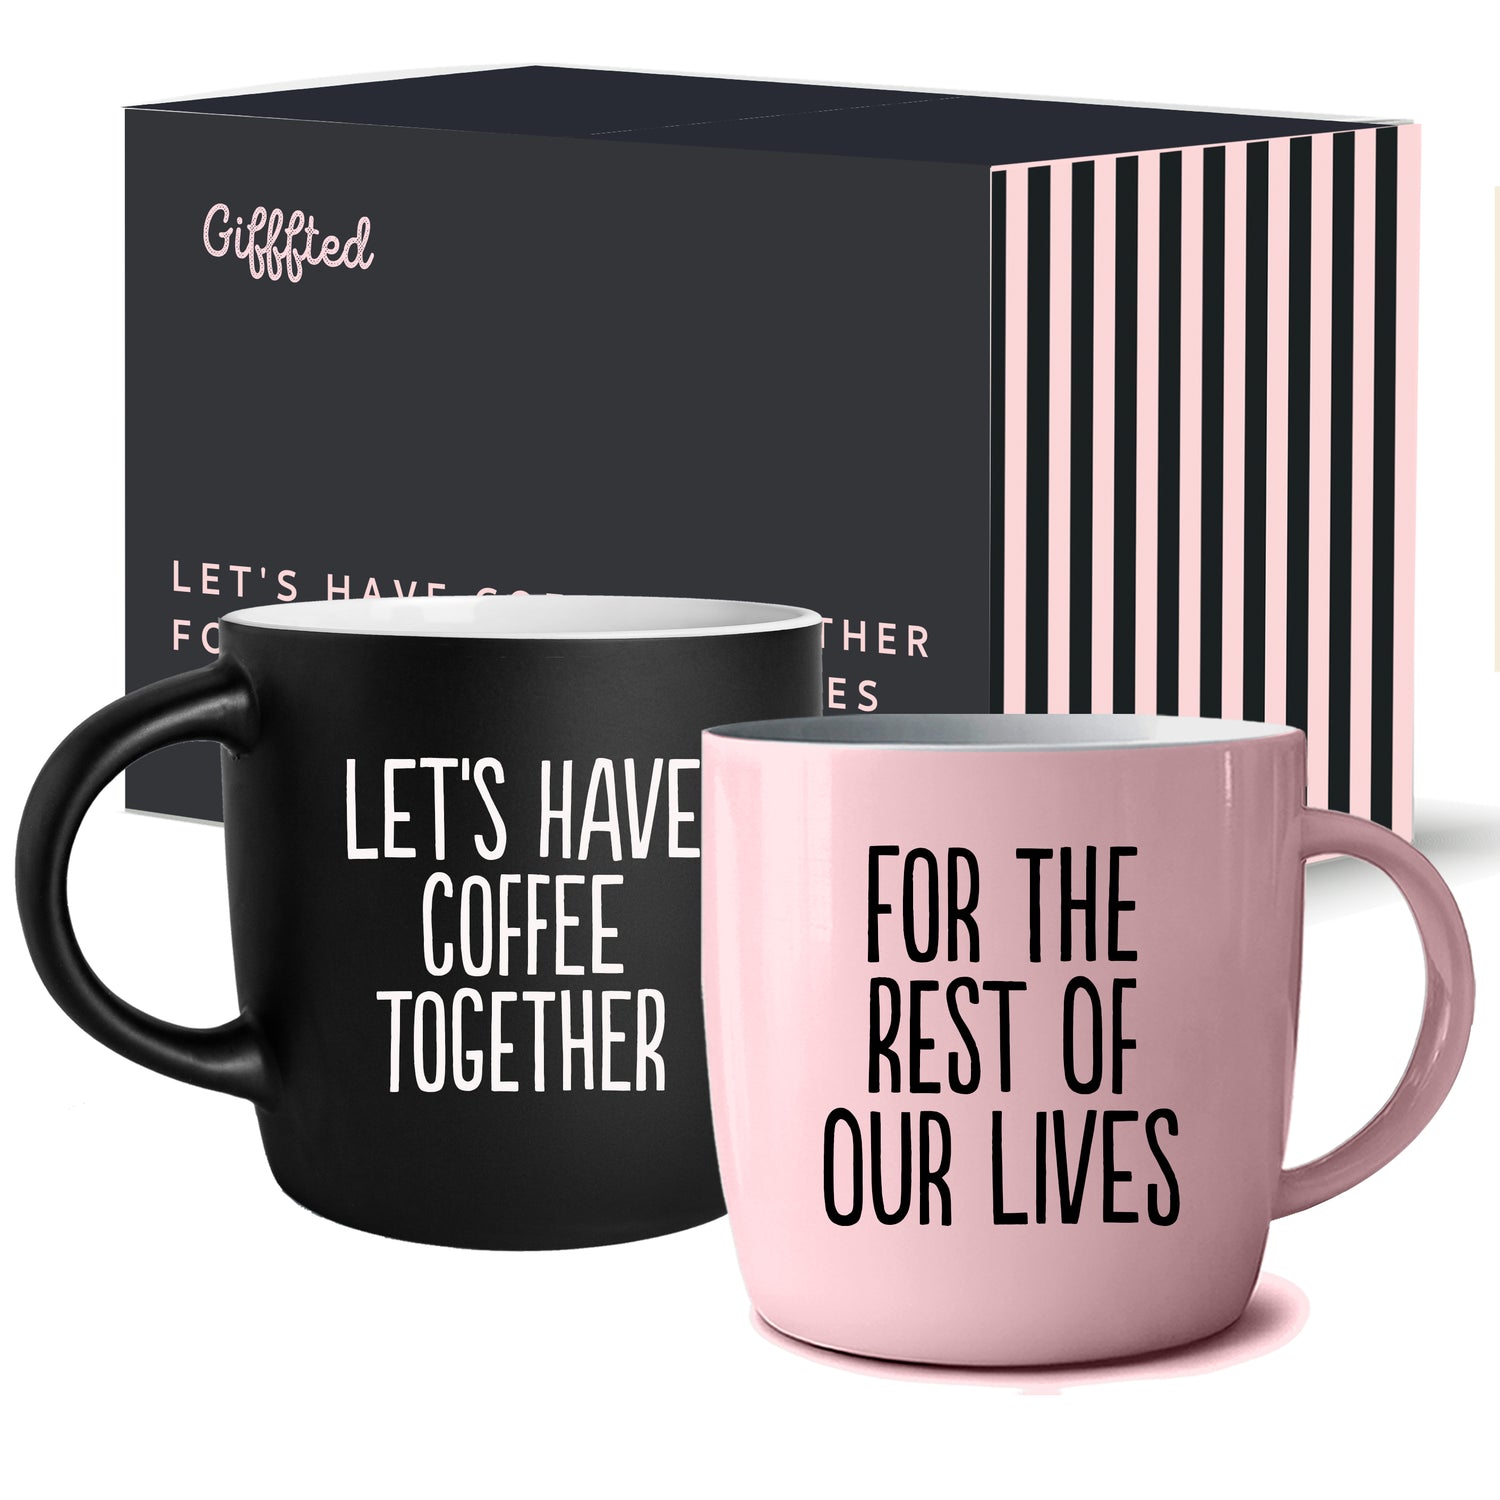 Lets Have Coffee Together For the Rest of Our Lives Coffee Mug Set